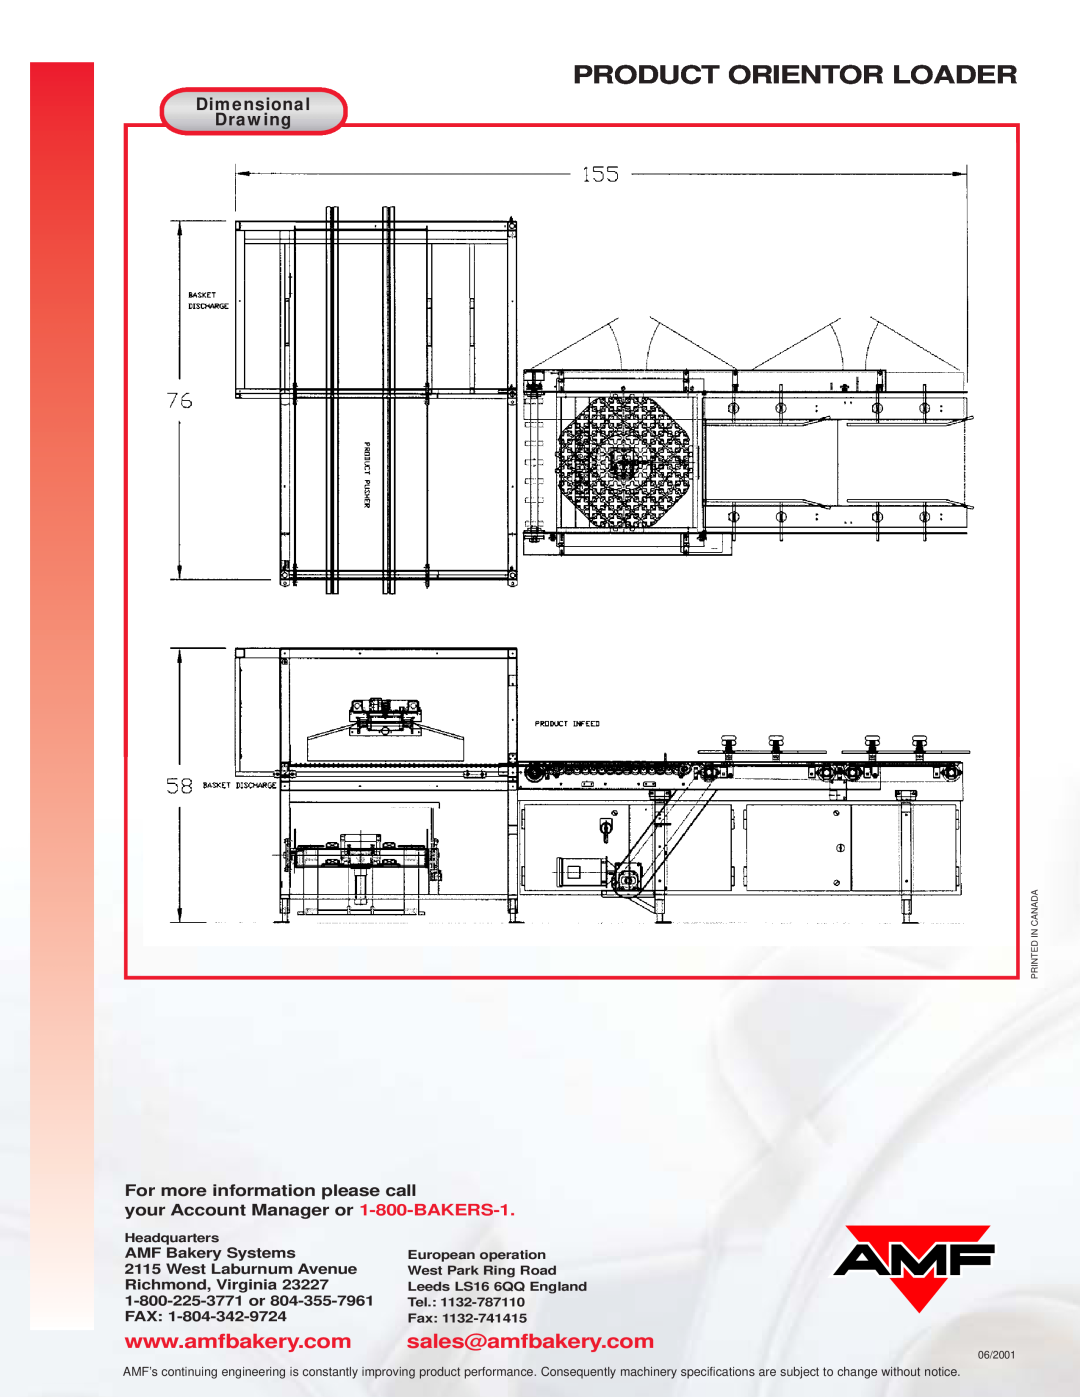 AMF Bread And Bun Products Orientor Loader manual Product Orientor Loader, Headquarters, Fax, 06/2001 